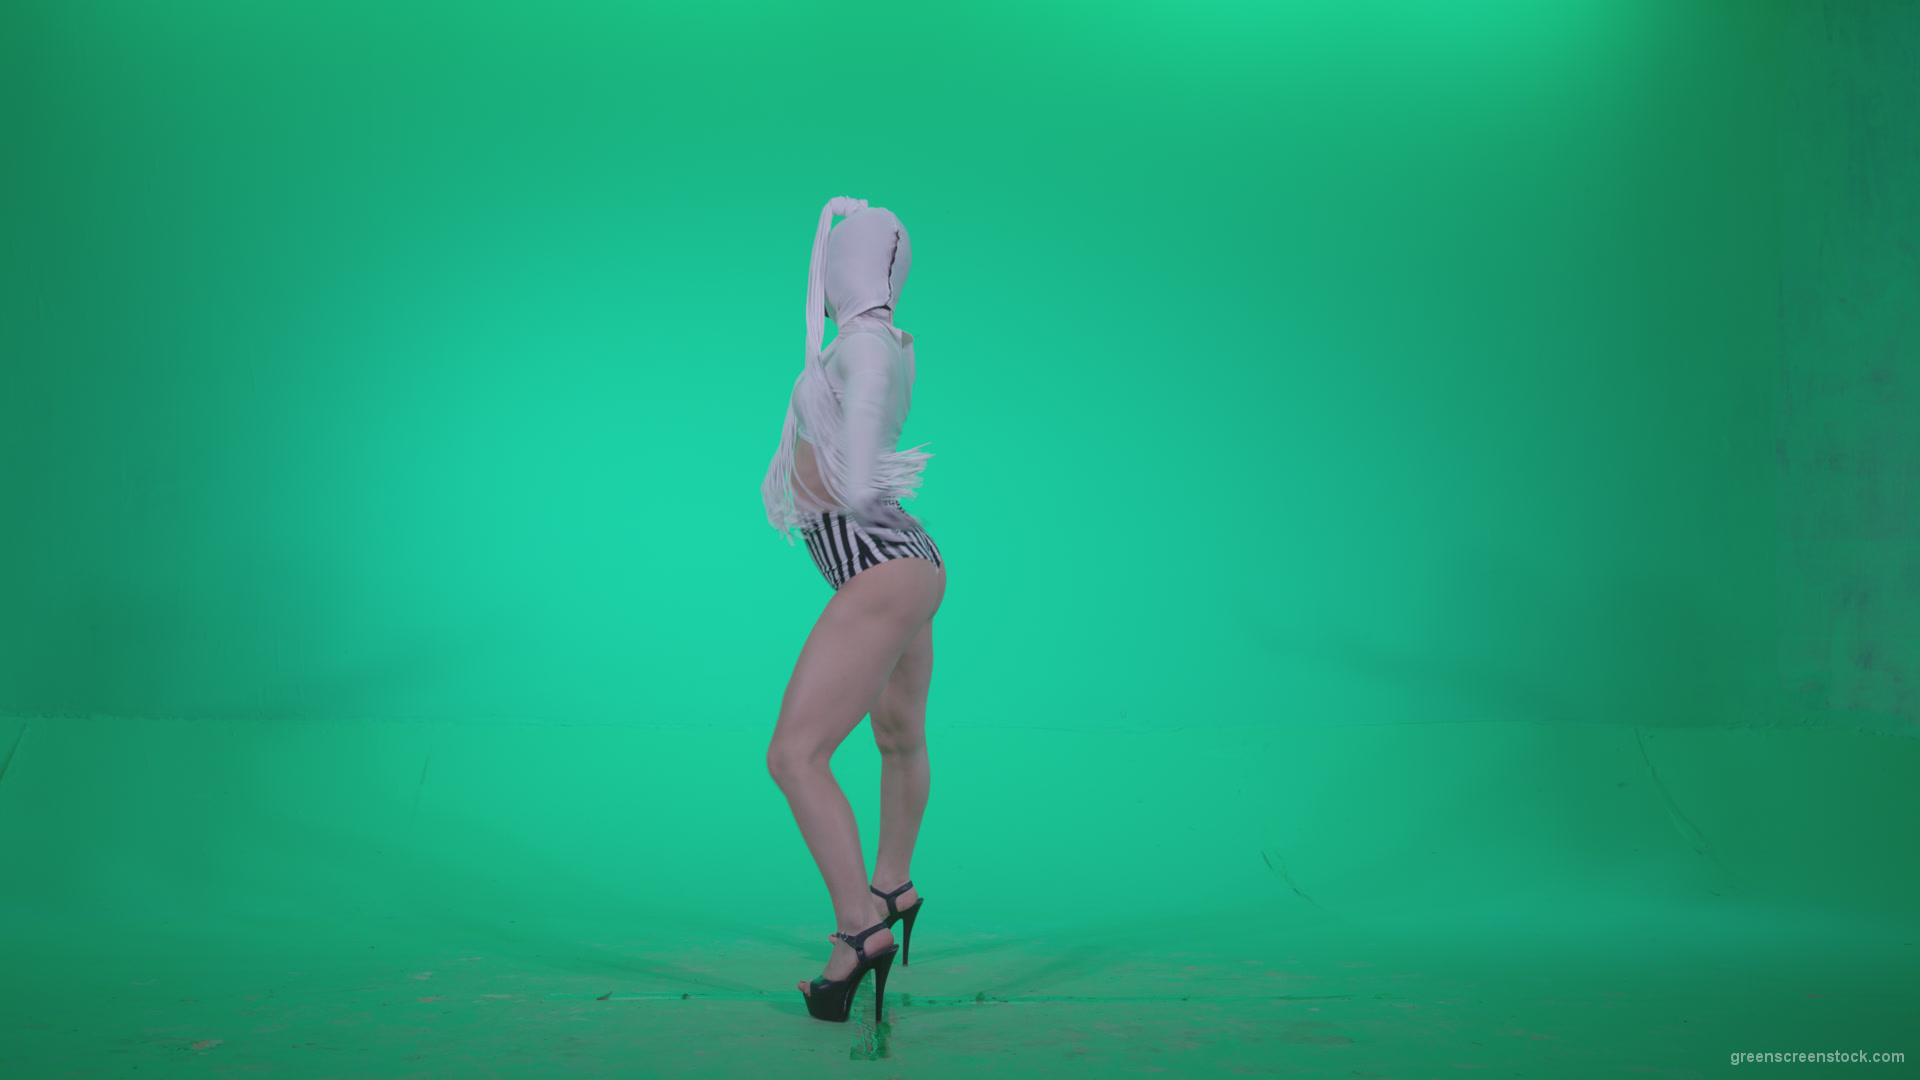 Go-go-Dancer-with-Latex-Top-t2-Green-Screen-Video-Footage_007 Green Screen Stock